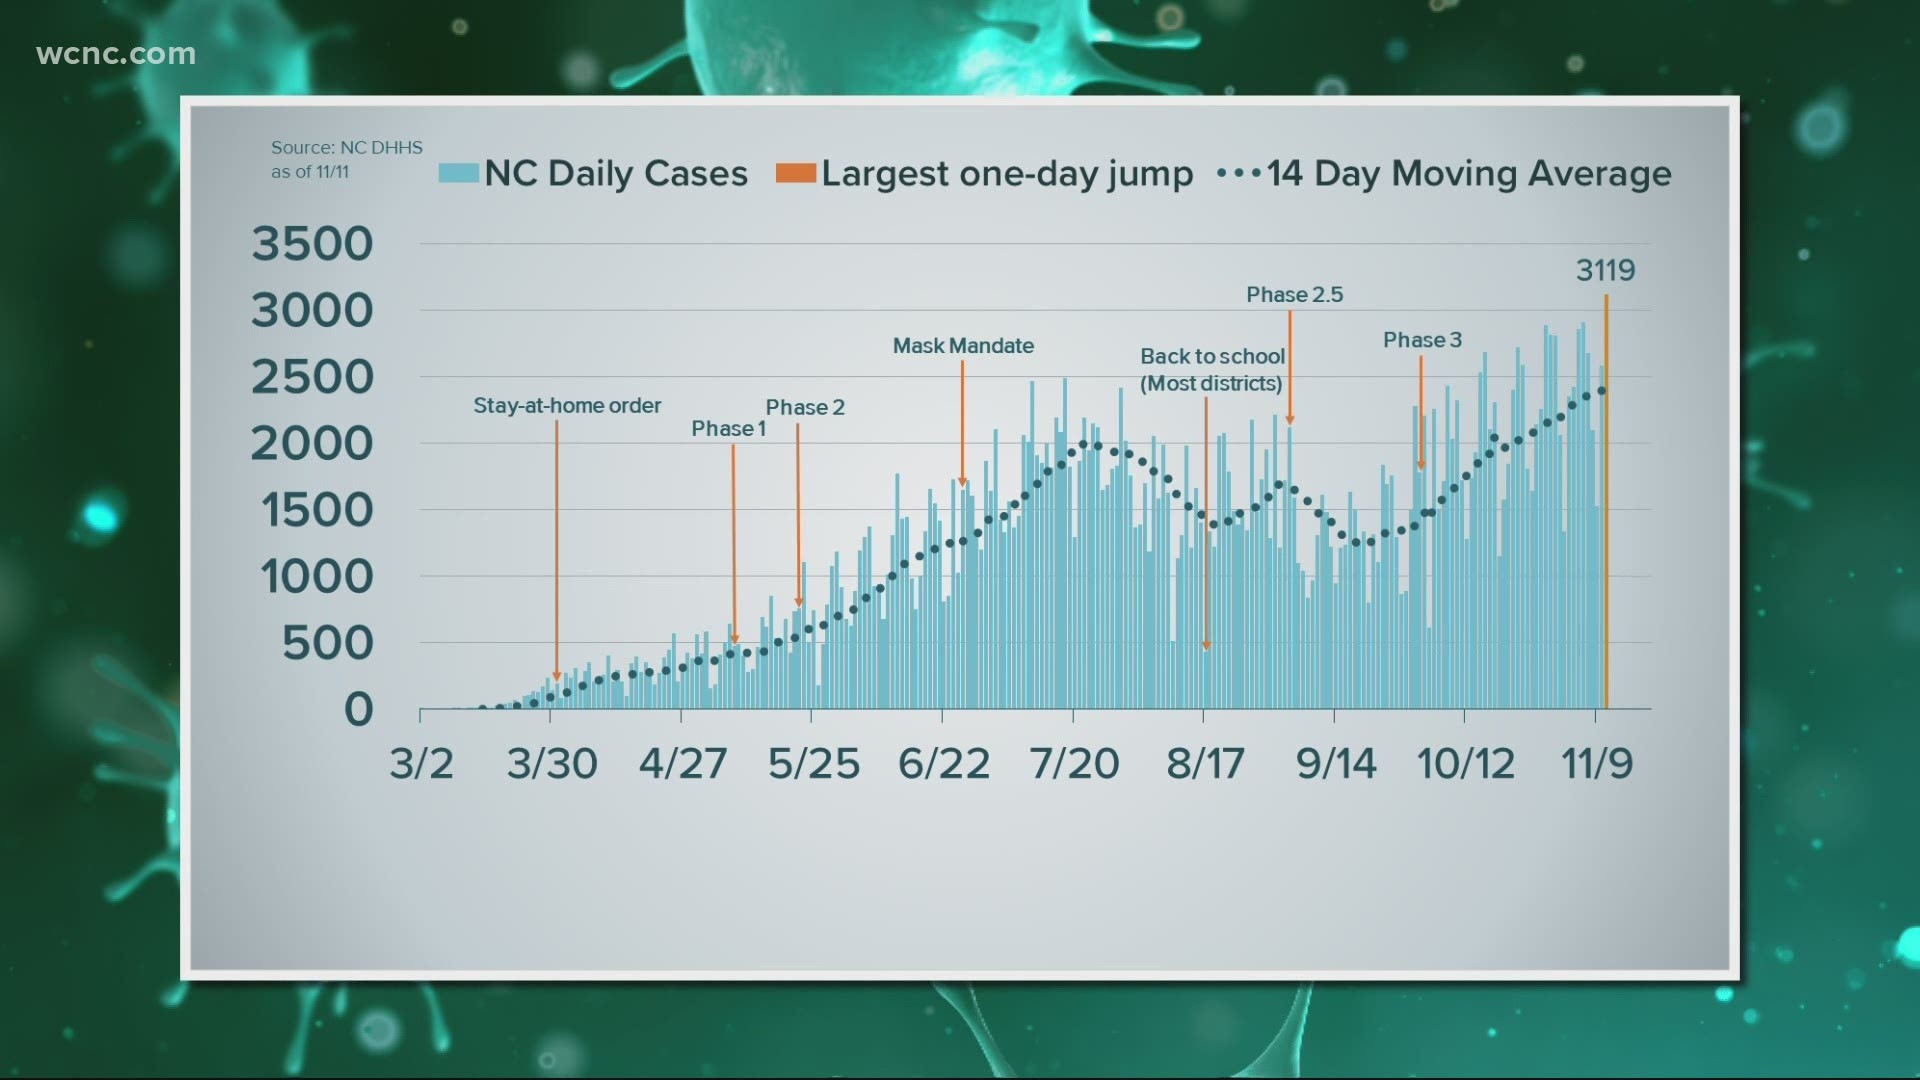 Wednesday, North Carolina broke the threshold of 3,000+ new COVID-19 cases in a day.